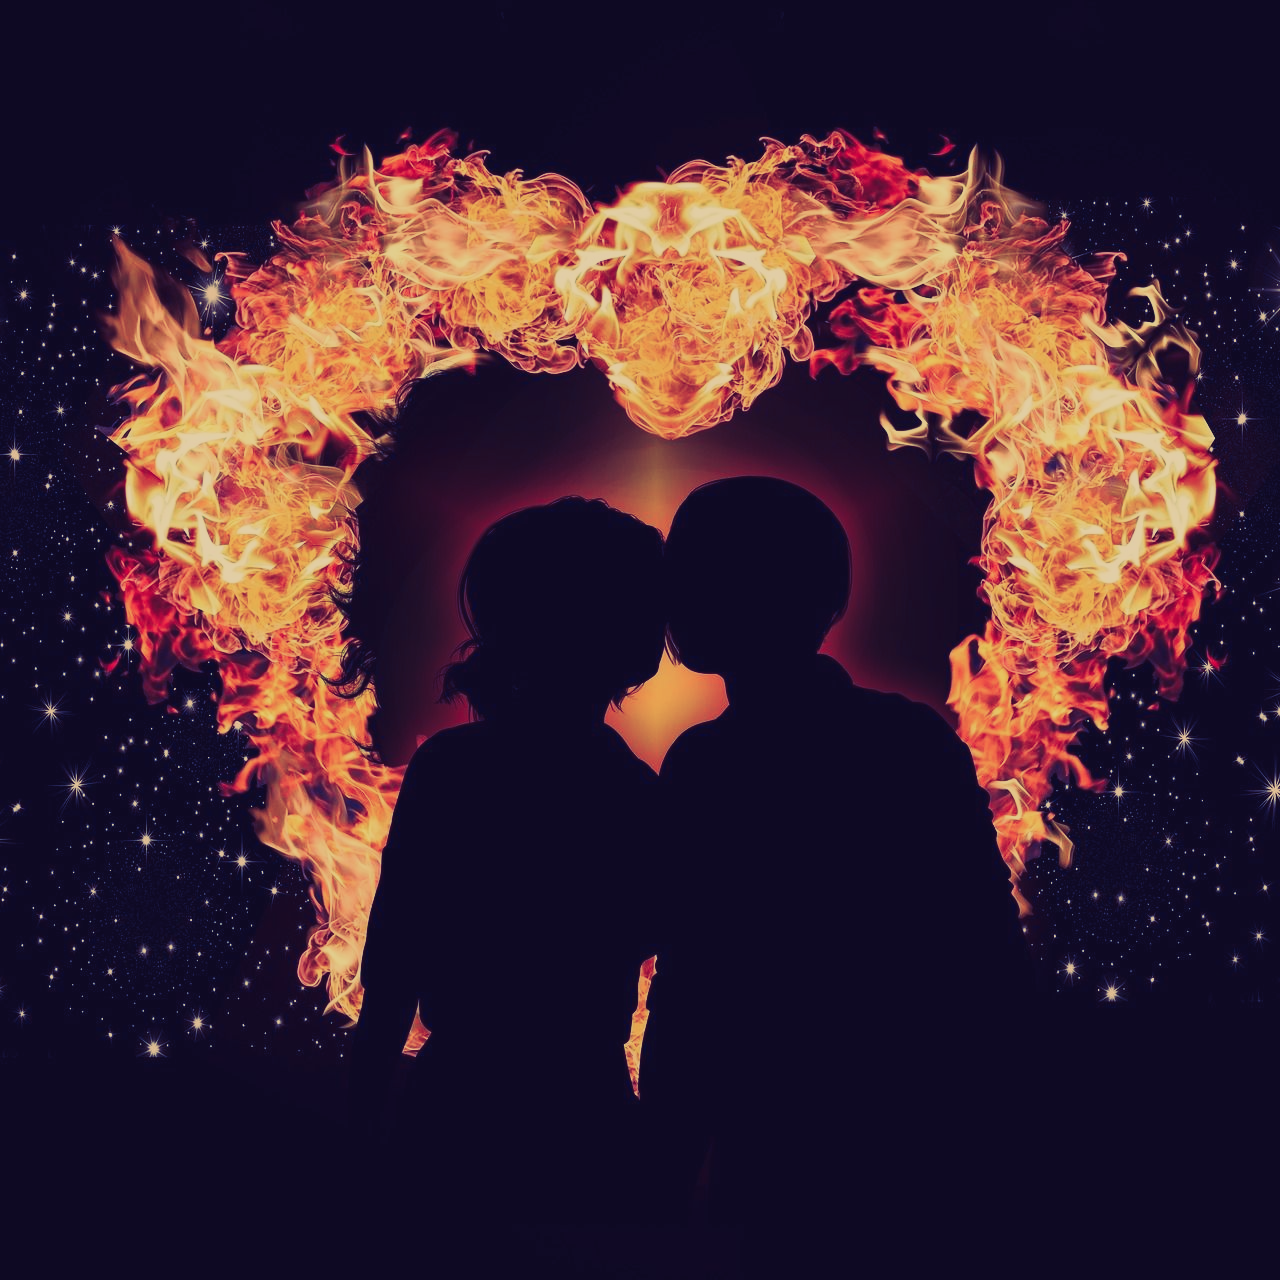 A couple kissing in front of a heart shaped fire.